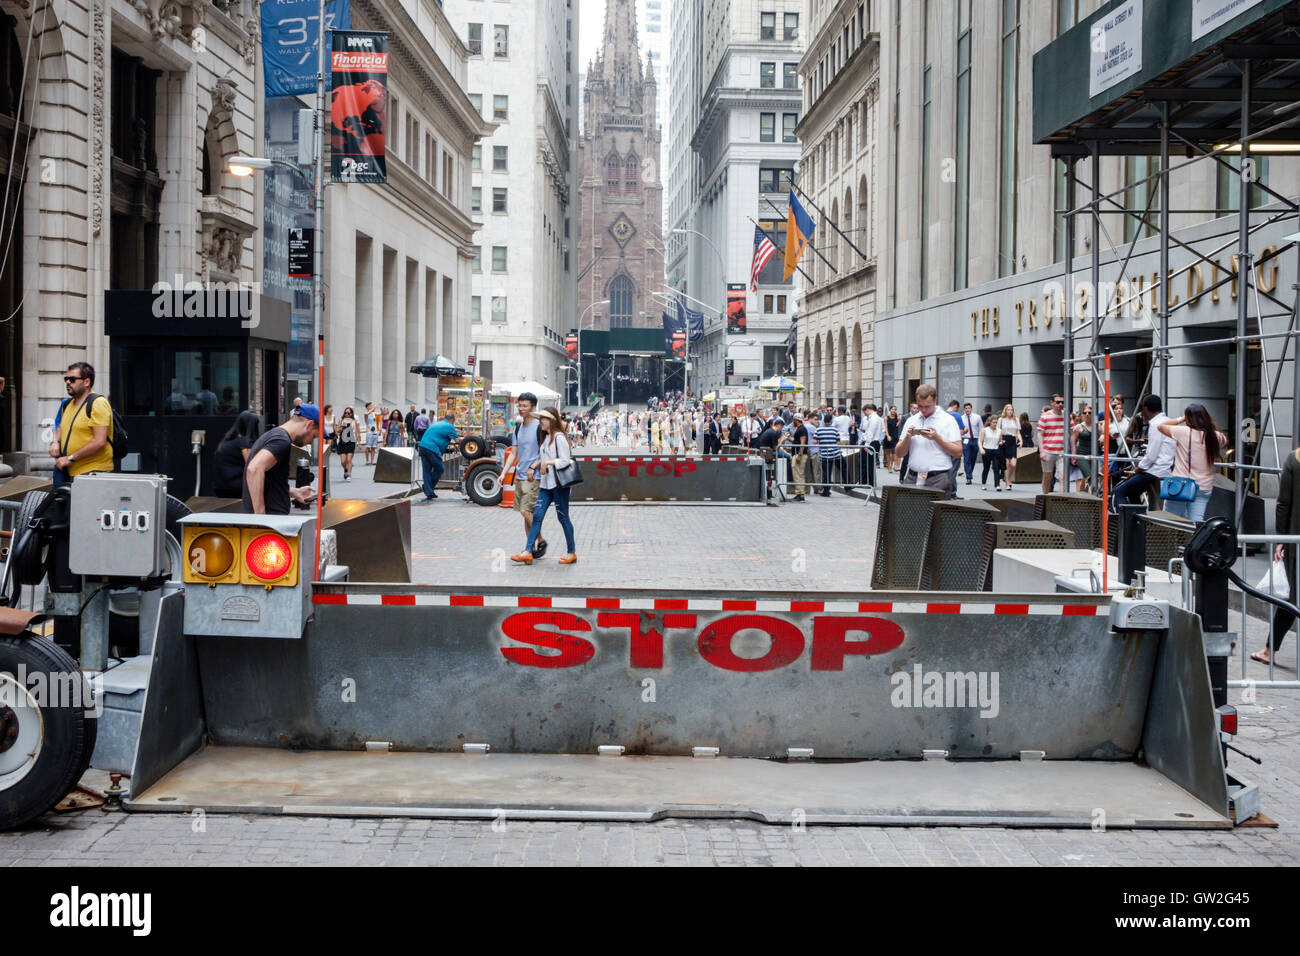 New York City,NY NYC Lower Manhattan,Financial District,Wall Street,New York Stock Exchange,NYSE,security barrier,traffic vehicle barricade,anti-terro Stock Photo